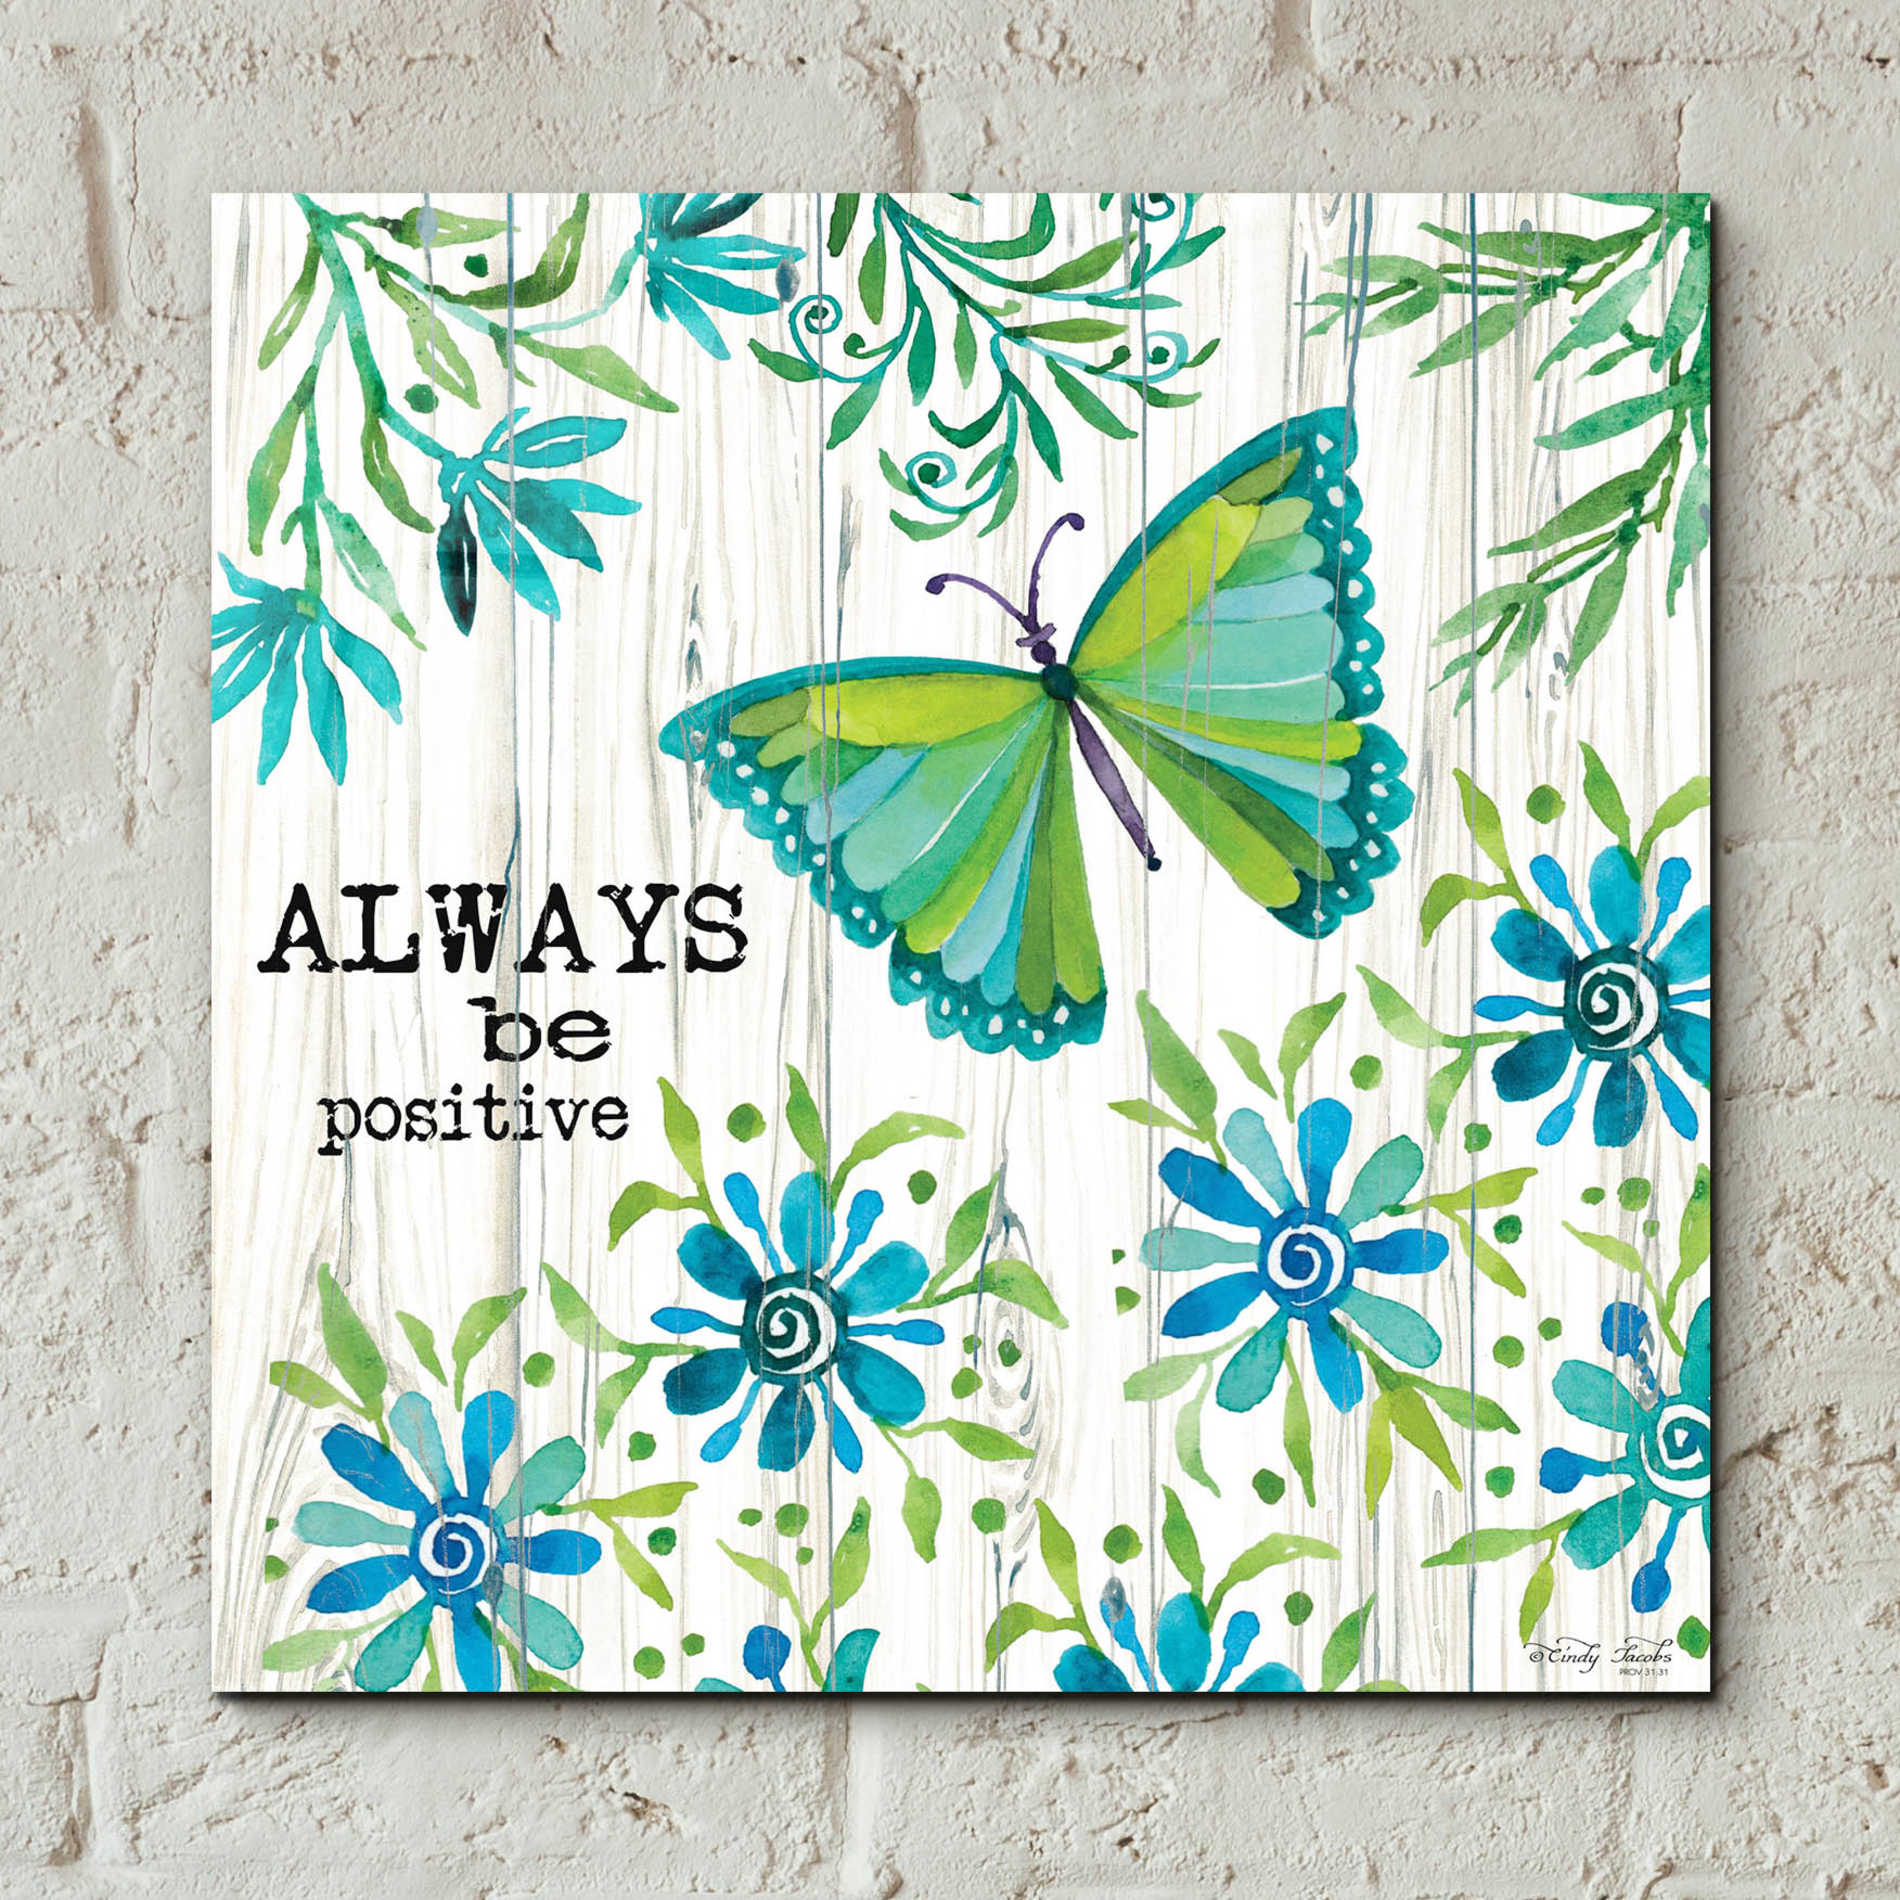 Epic Art 'Always Be Positive' by Cindy Jacobs, Acrylic Glass Wall Art,12x12